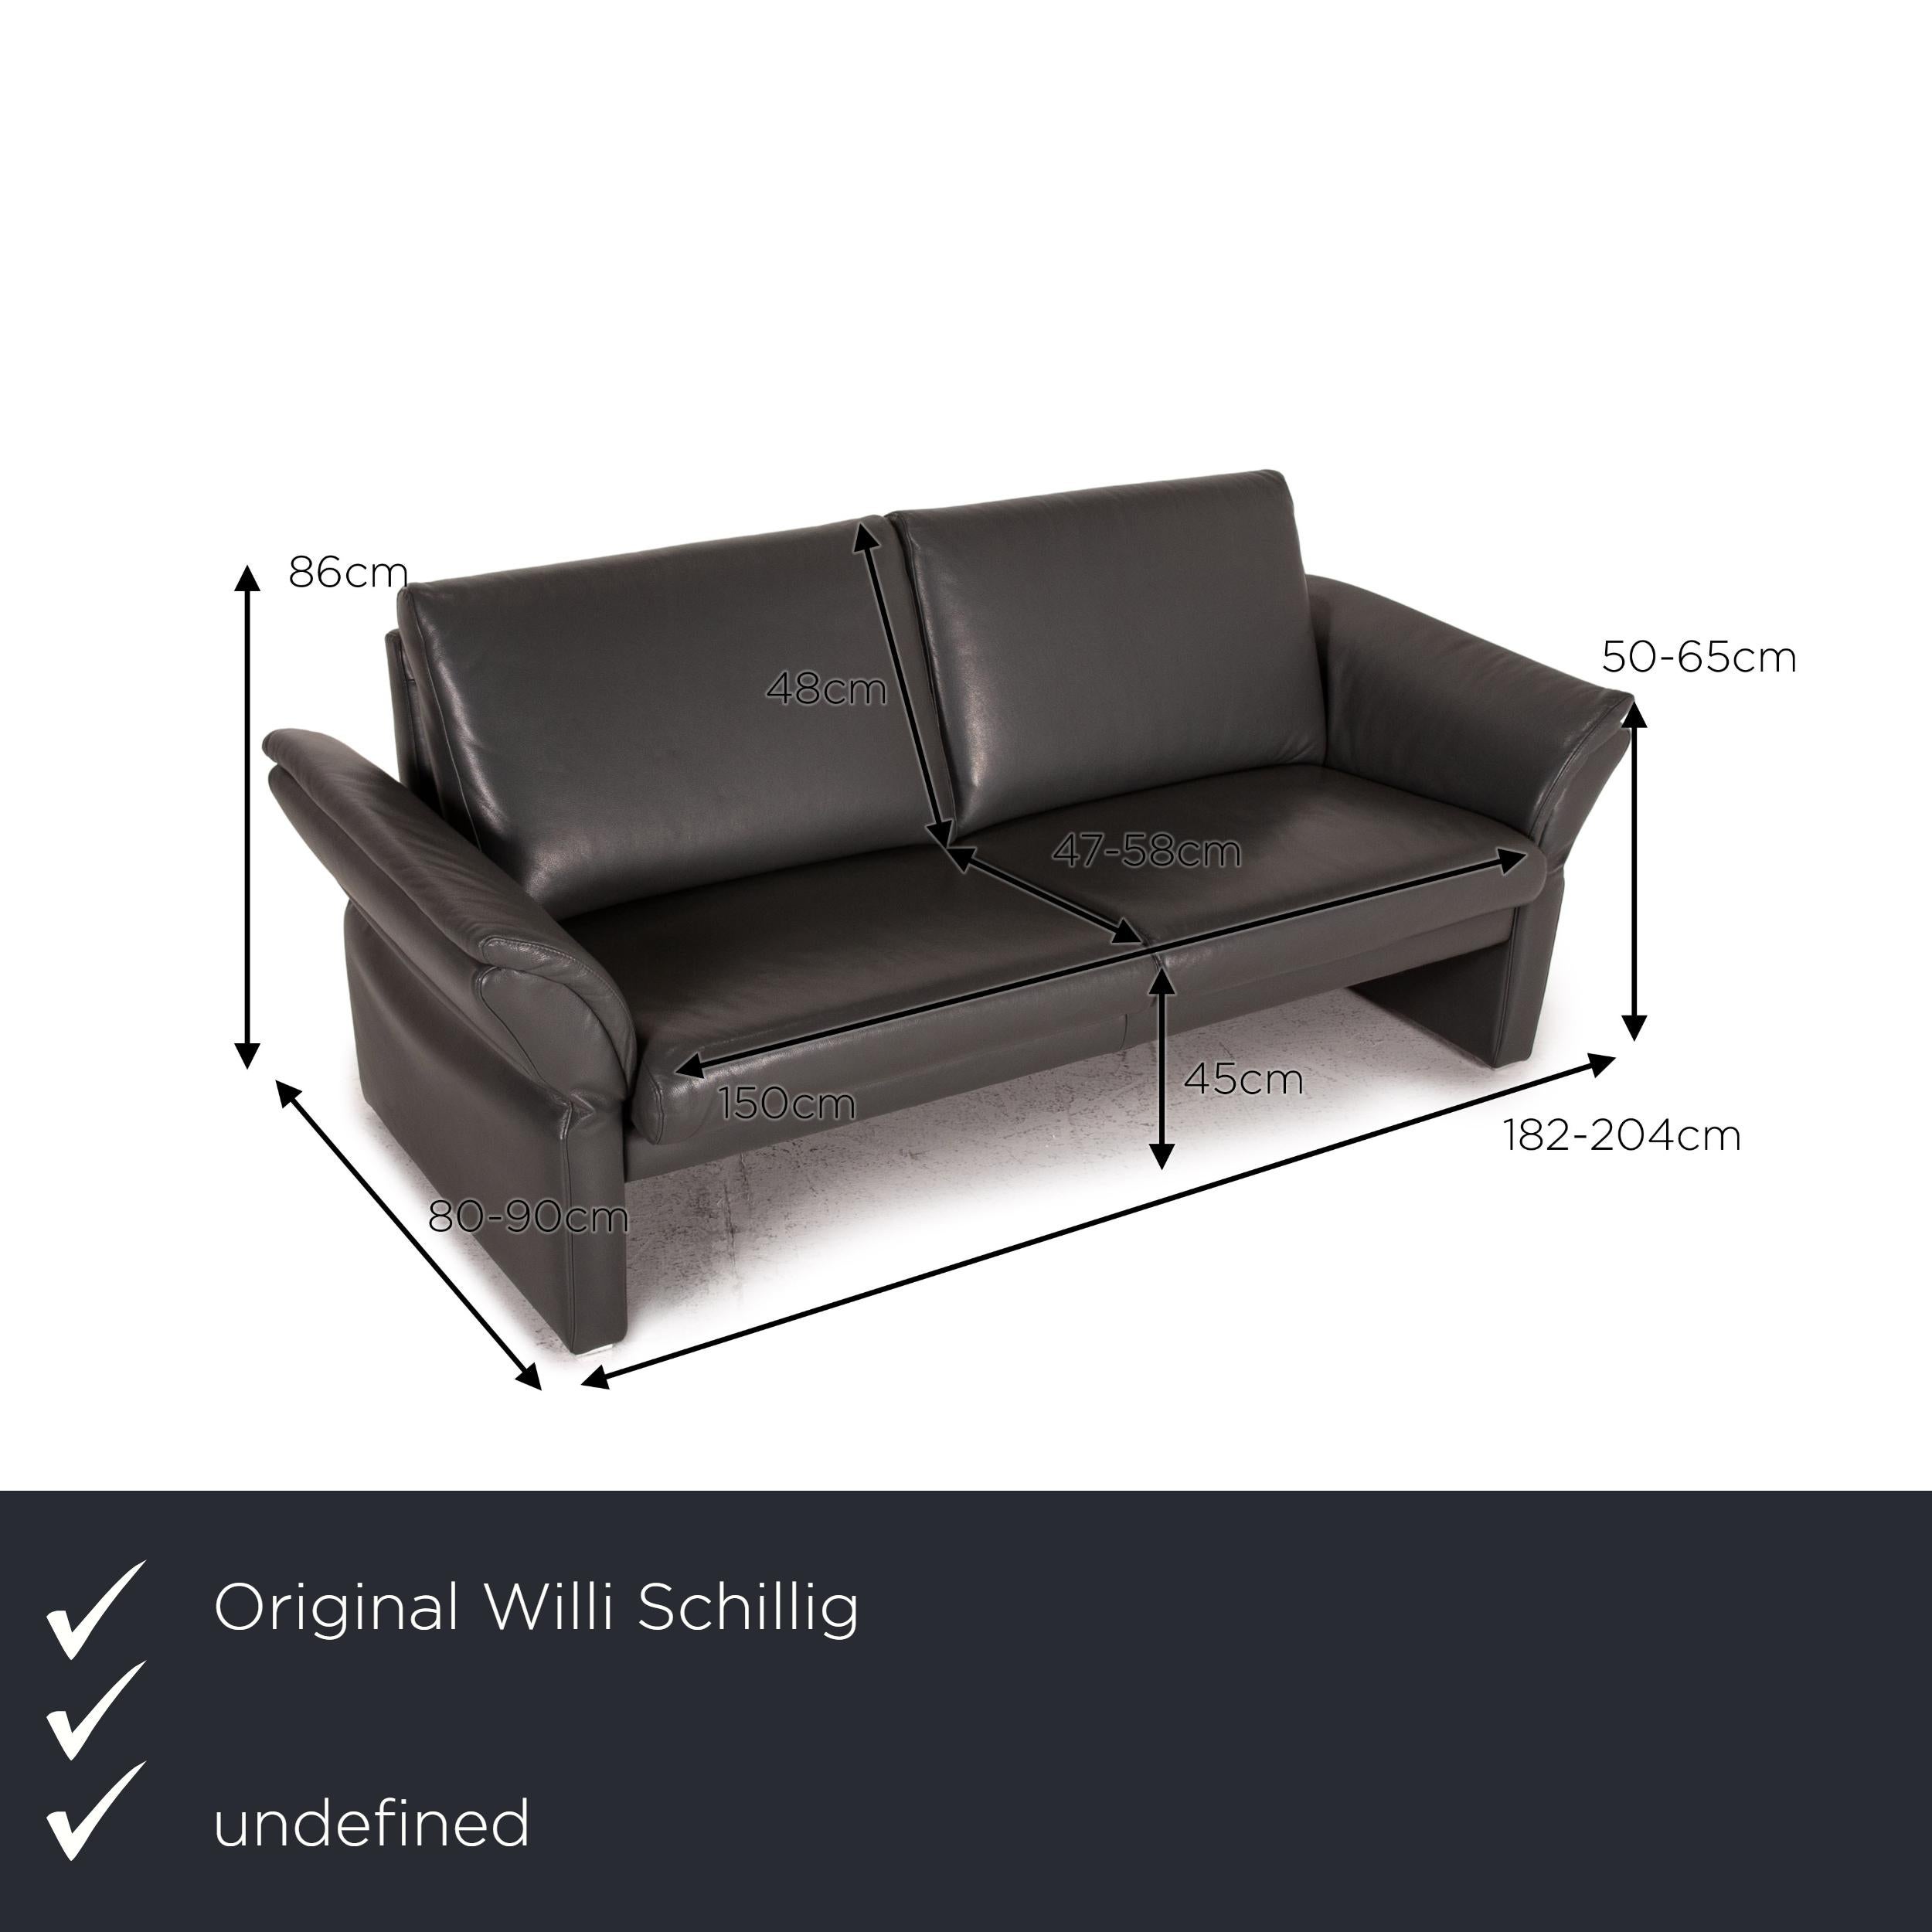 We present to you a Willi Schillig leather sofa set gray 2x two-seater.
 

 Product measurements in centimeters:
 

Depth: 80
Width: 182
Height: 86
Seat height: 45
Rest height: 50
Seat depth: 47
Seat width: 150
Back height: 48.
 